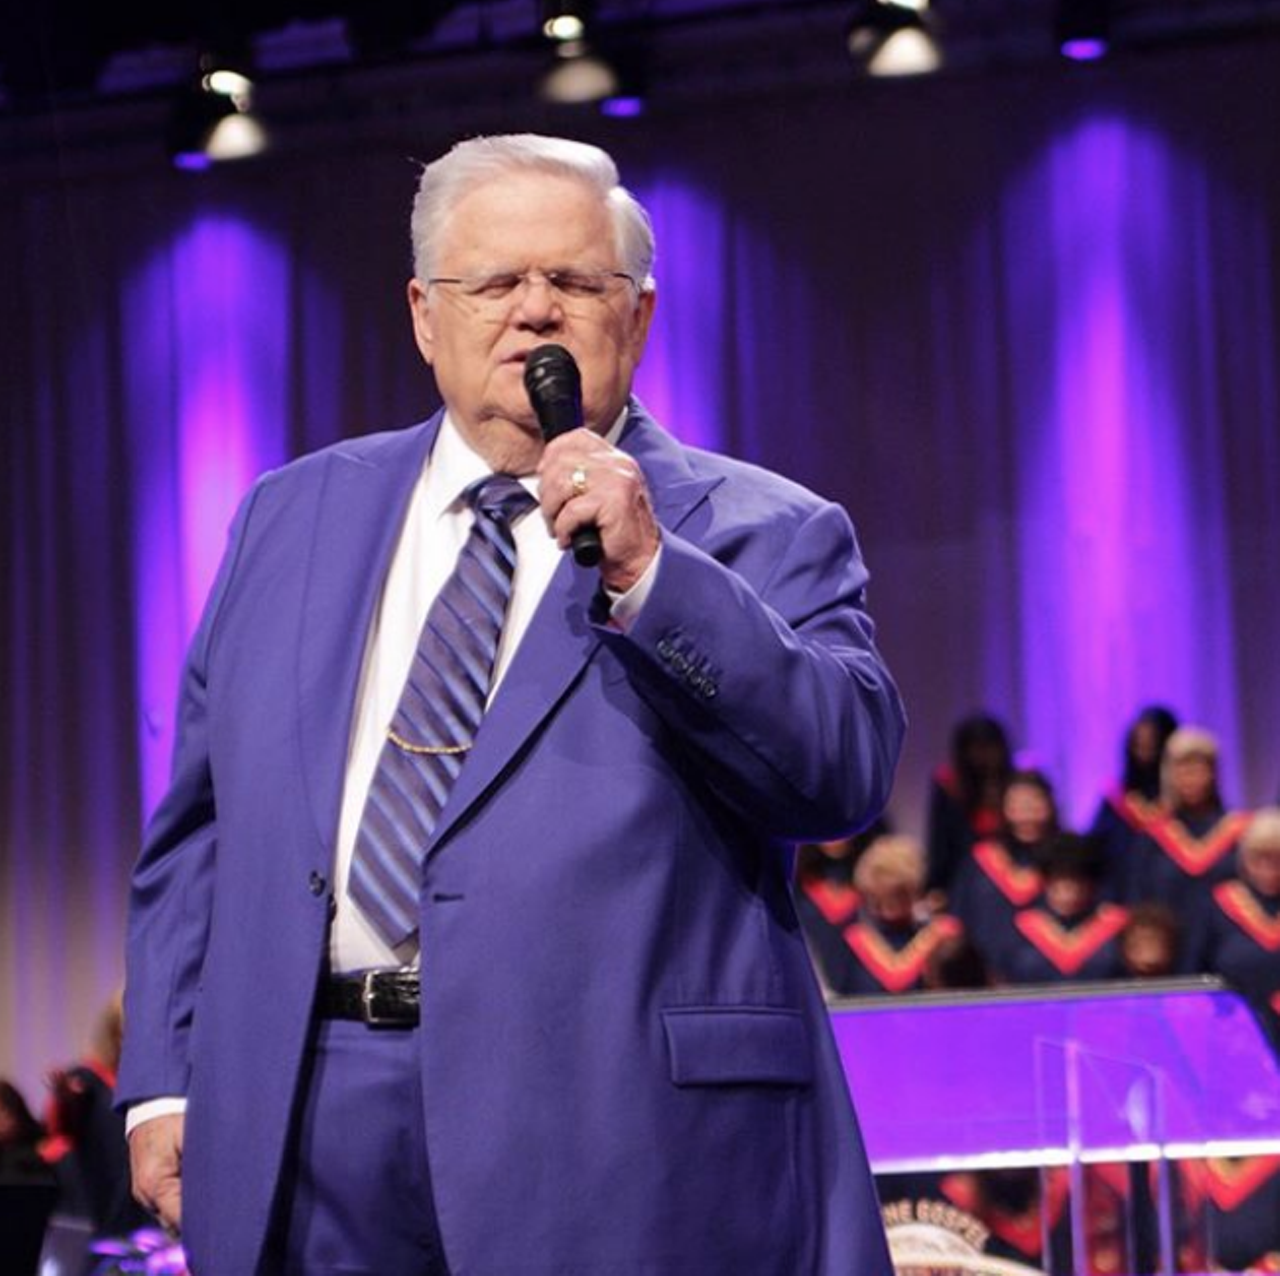 On the Catholic Church (Date unknown)
Bonus: Though he has since apologized for his statement (which is a rarity), Hagee once referred to the Roman Catholic Church as the “great whore of Revelation,” a “false cult system” and the “anti-Christ.”
Photo via Instagram / pastorjohnhagee